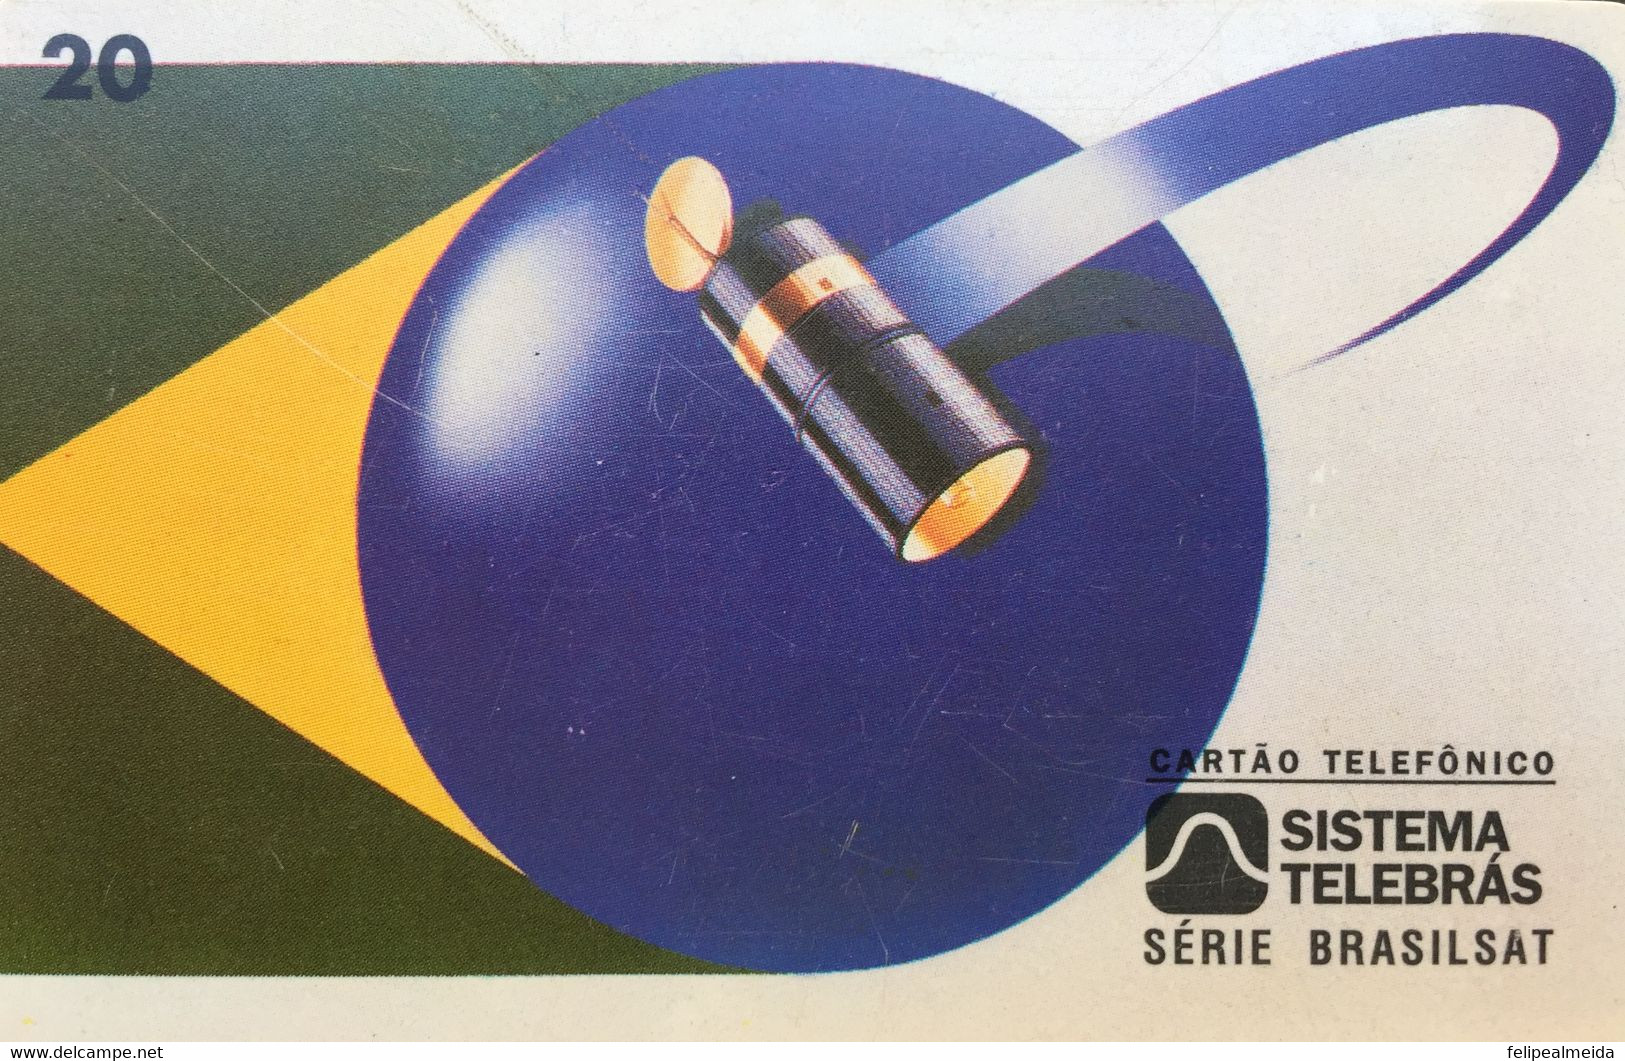 Phone Card Made By Telebras In 1997 - Series Brasilsat - On February 28, 1994, Brazil Launched The Second Generation Of - Spazio